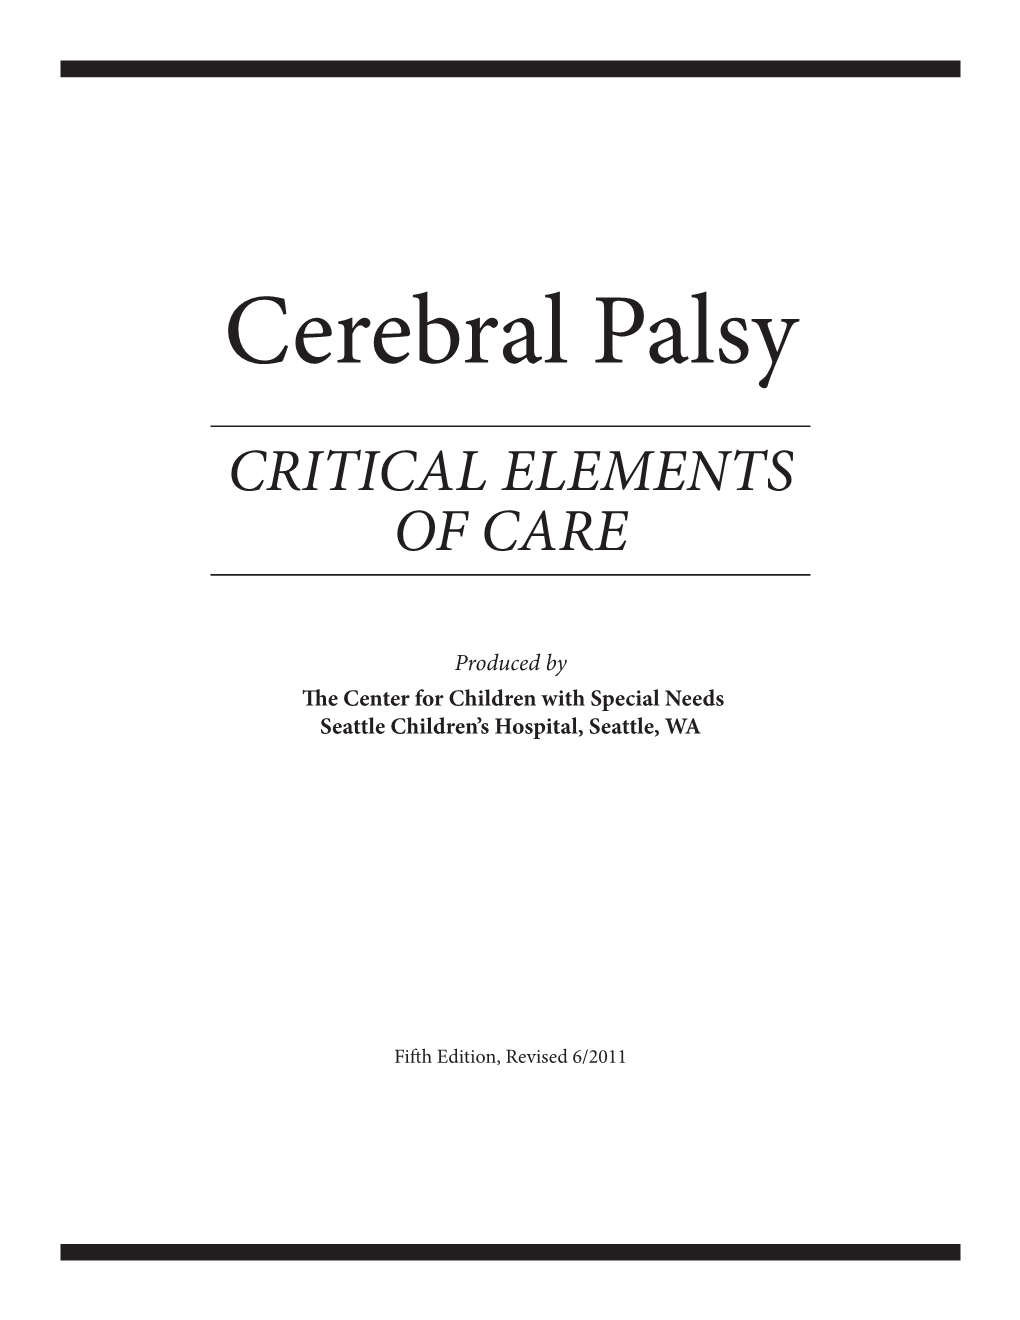 Cerebral Palsy CRITICAL ELEMENTS of CARE